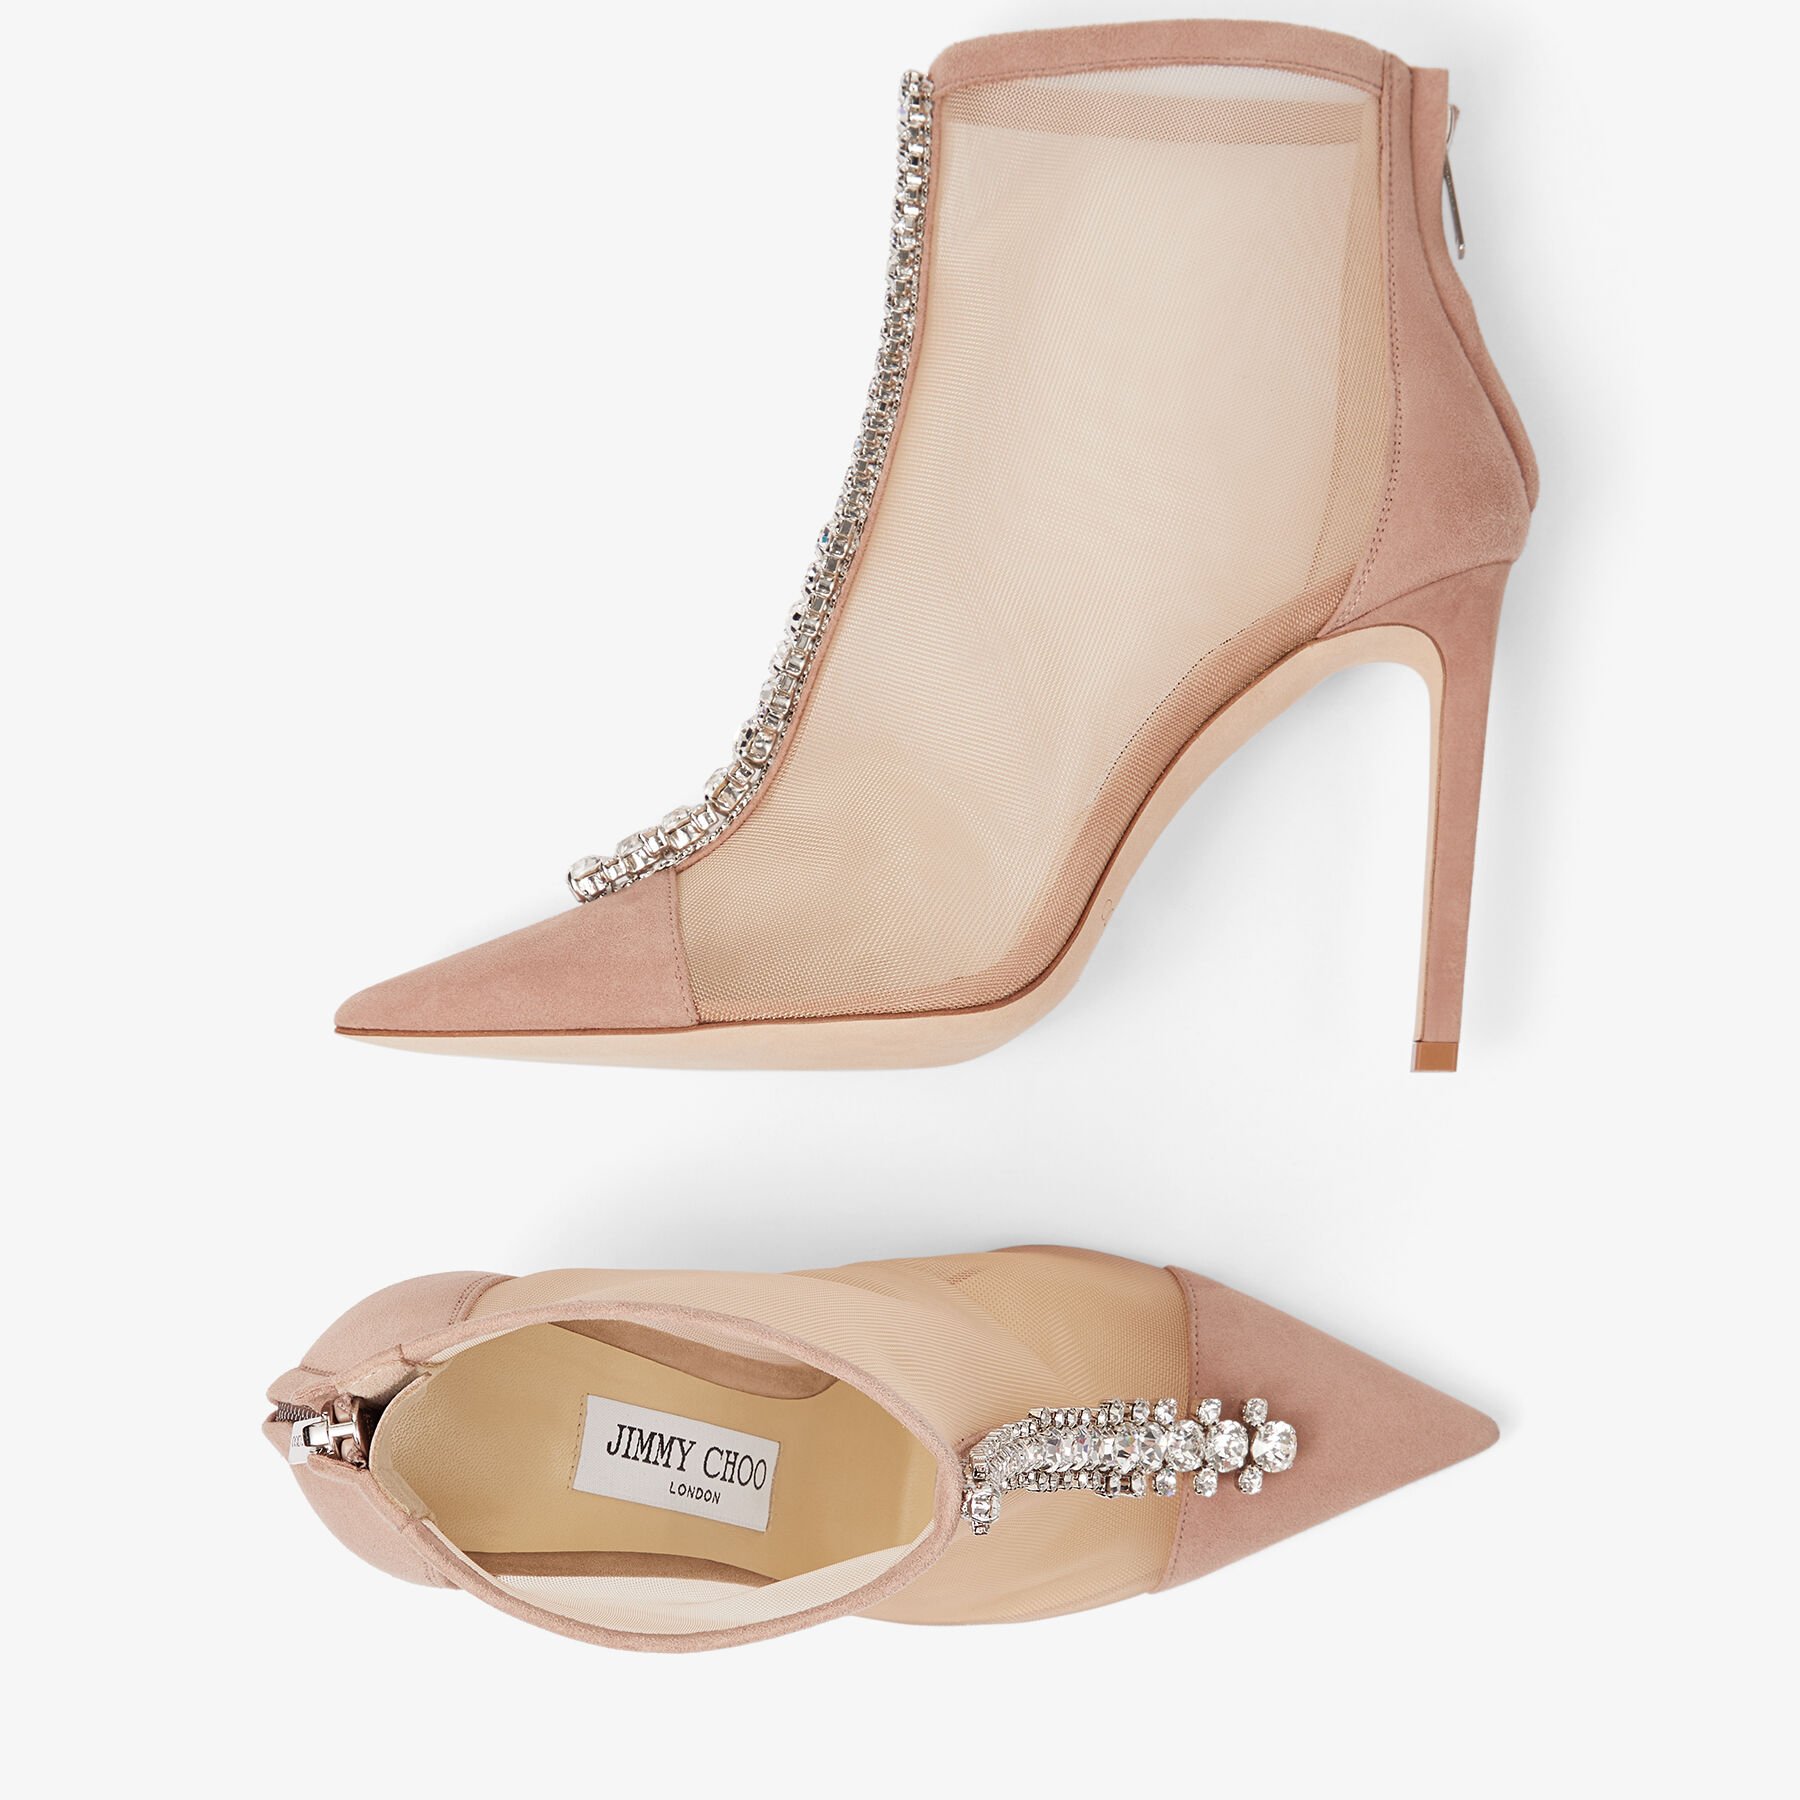 Ballet Pink Suede and Mesh Ankle Boots with Crystal Embellishment ...